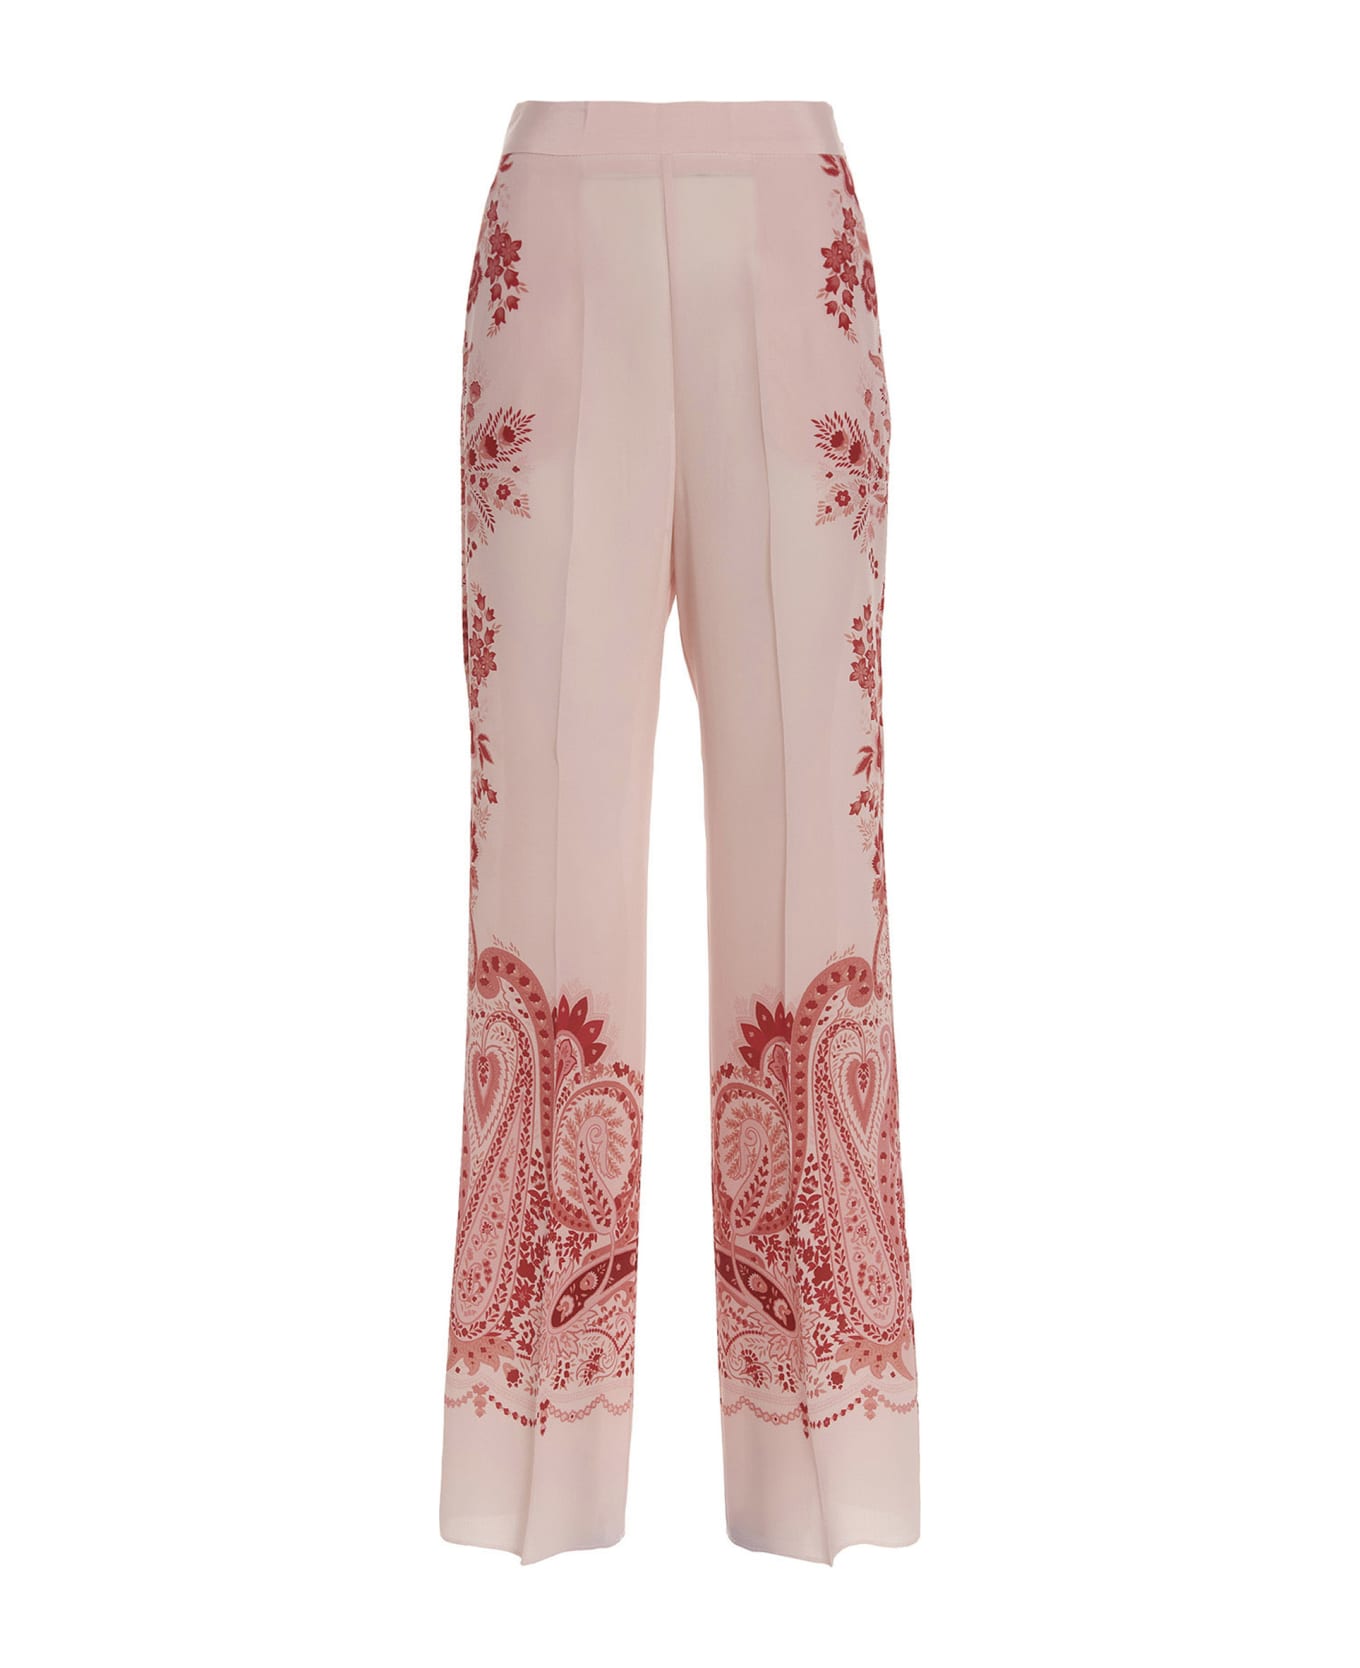 Etro 'lucy' Pants - Pink